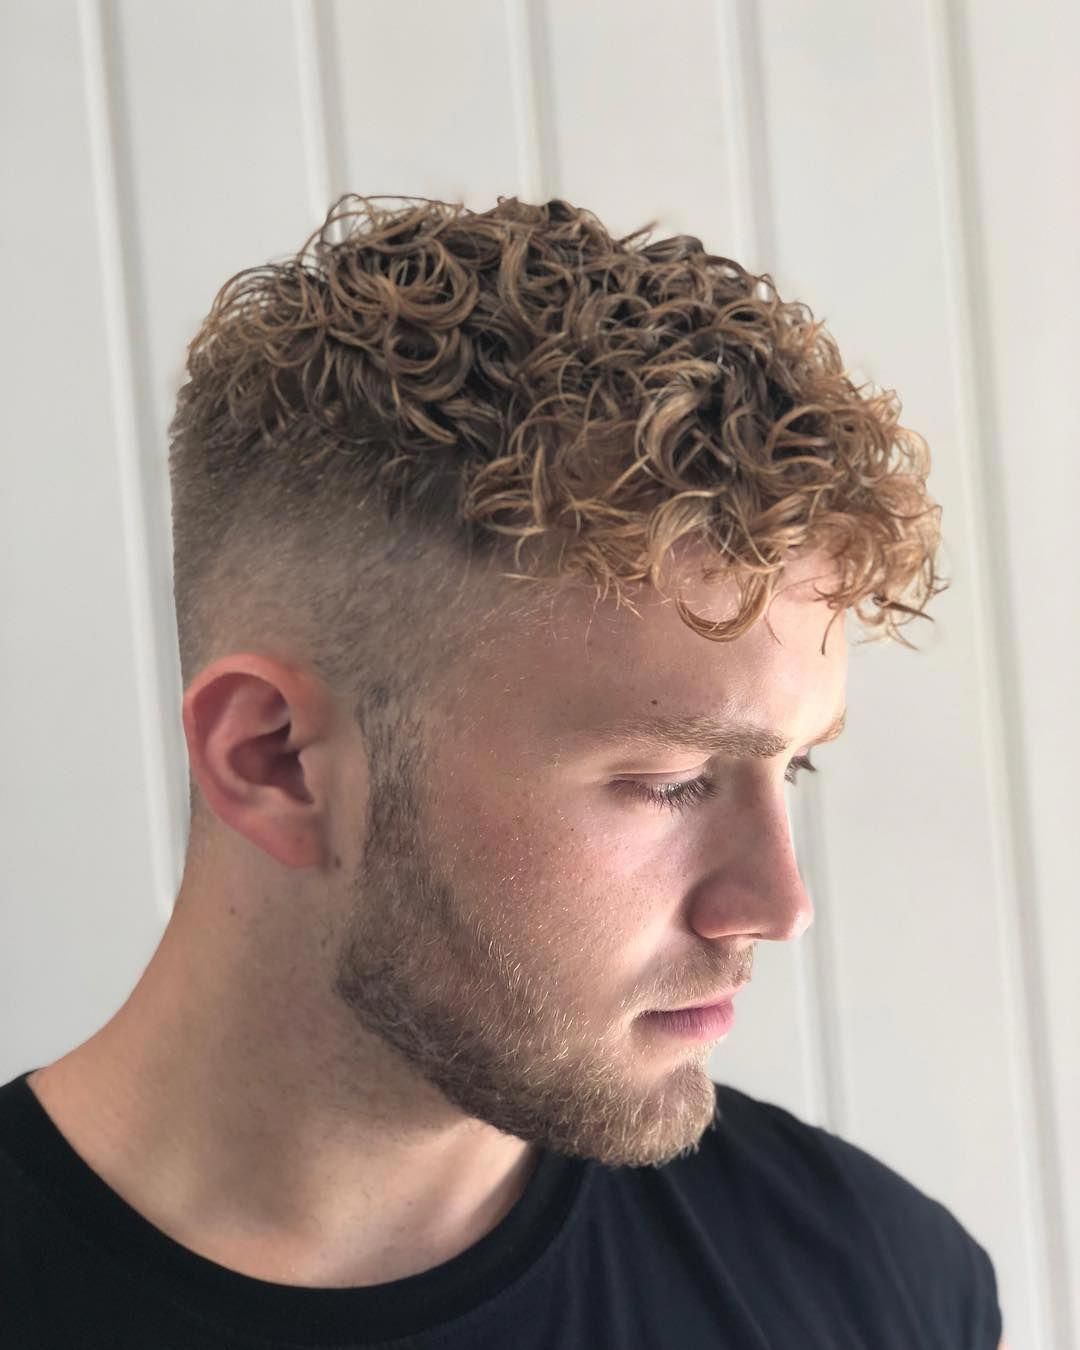 Perm.-2 70+ Outdated Hairstyle Ideas Coming Back in 2021